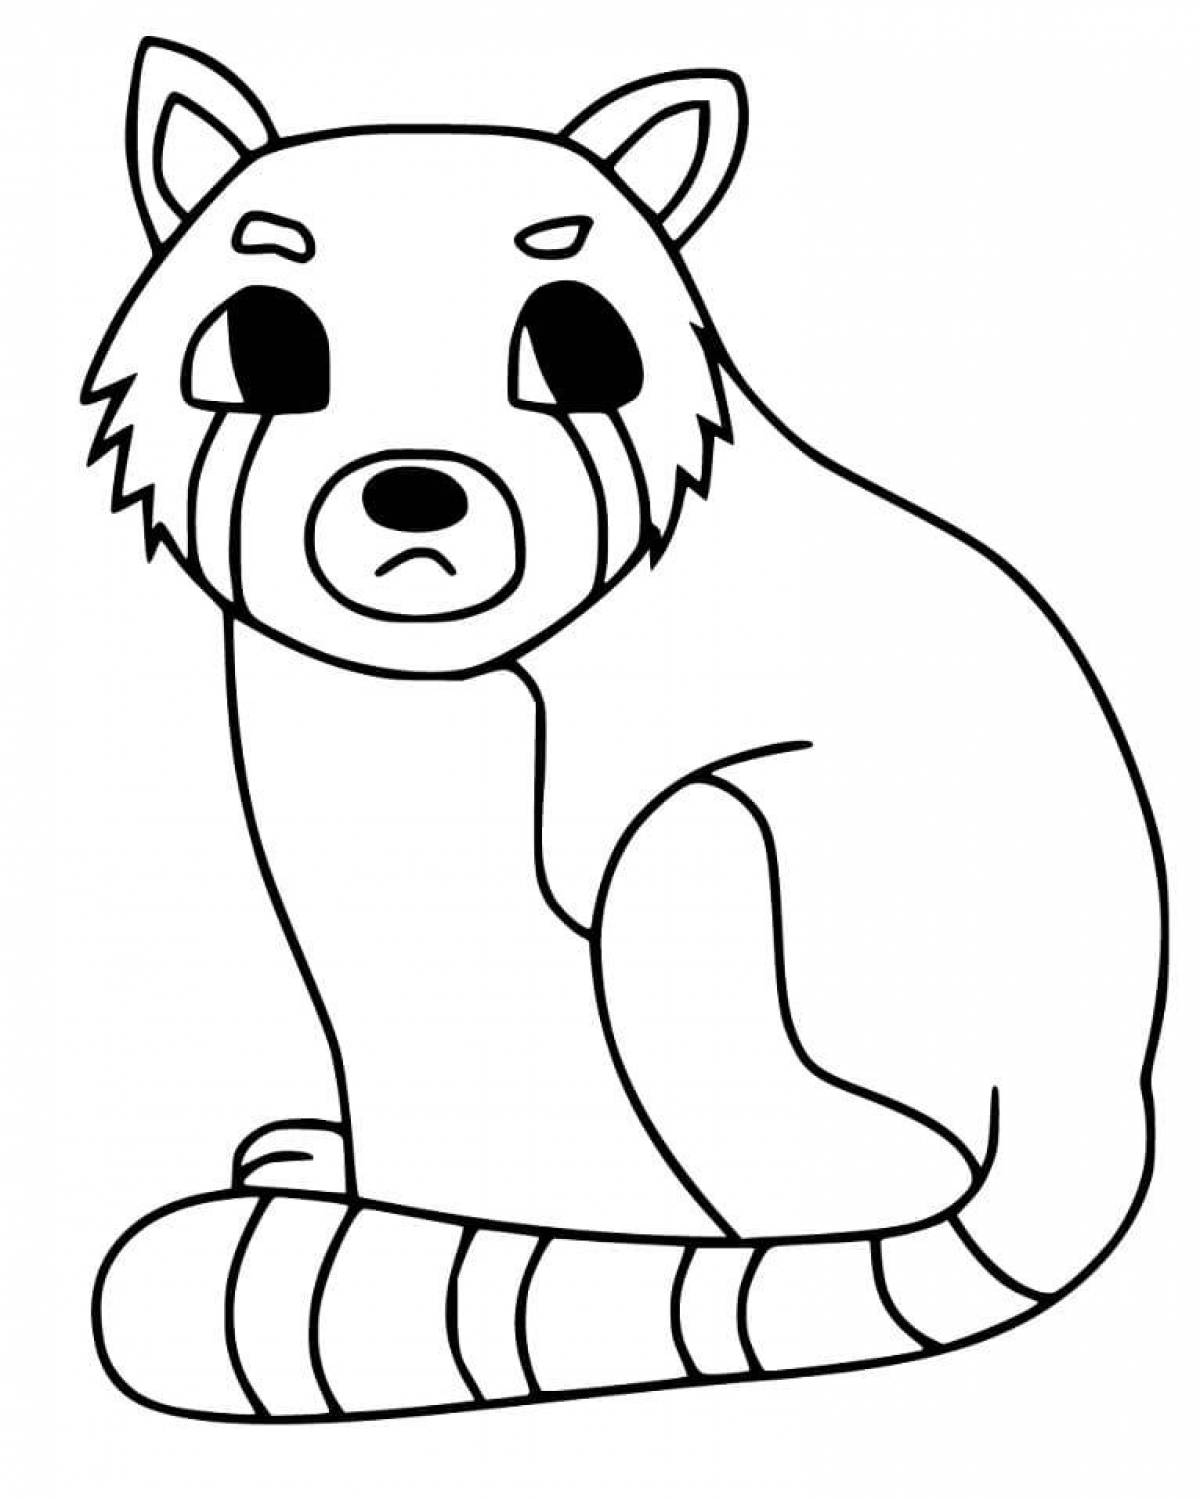 Coloring page of a sociable red panda